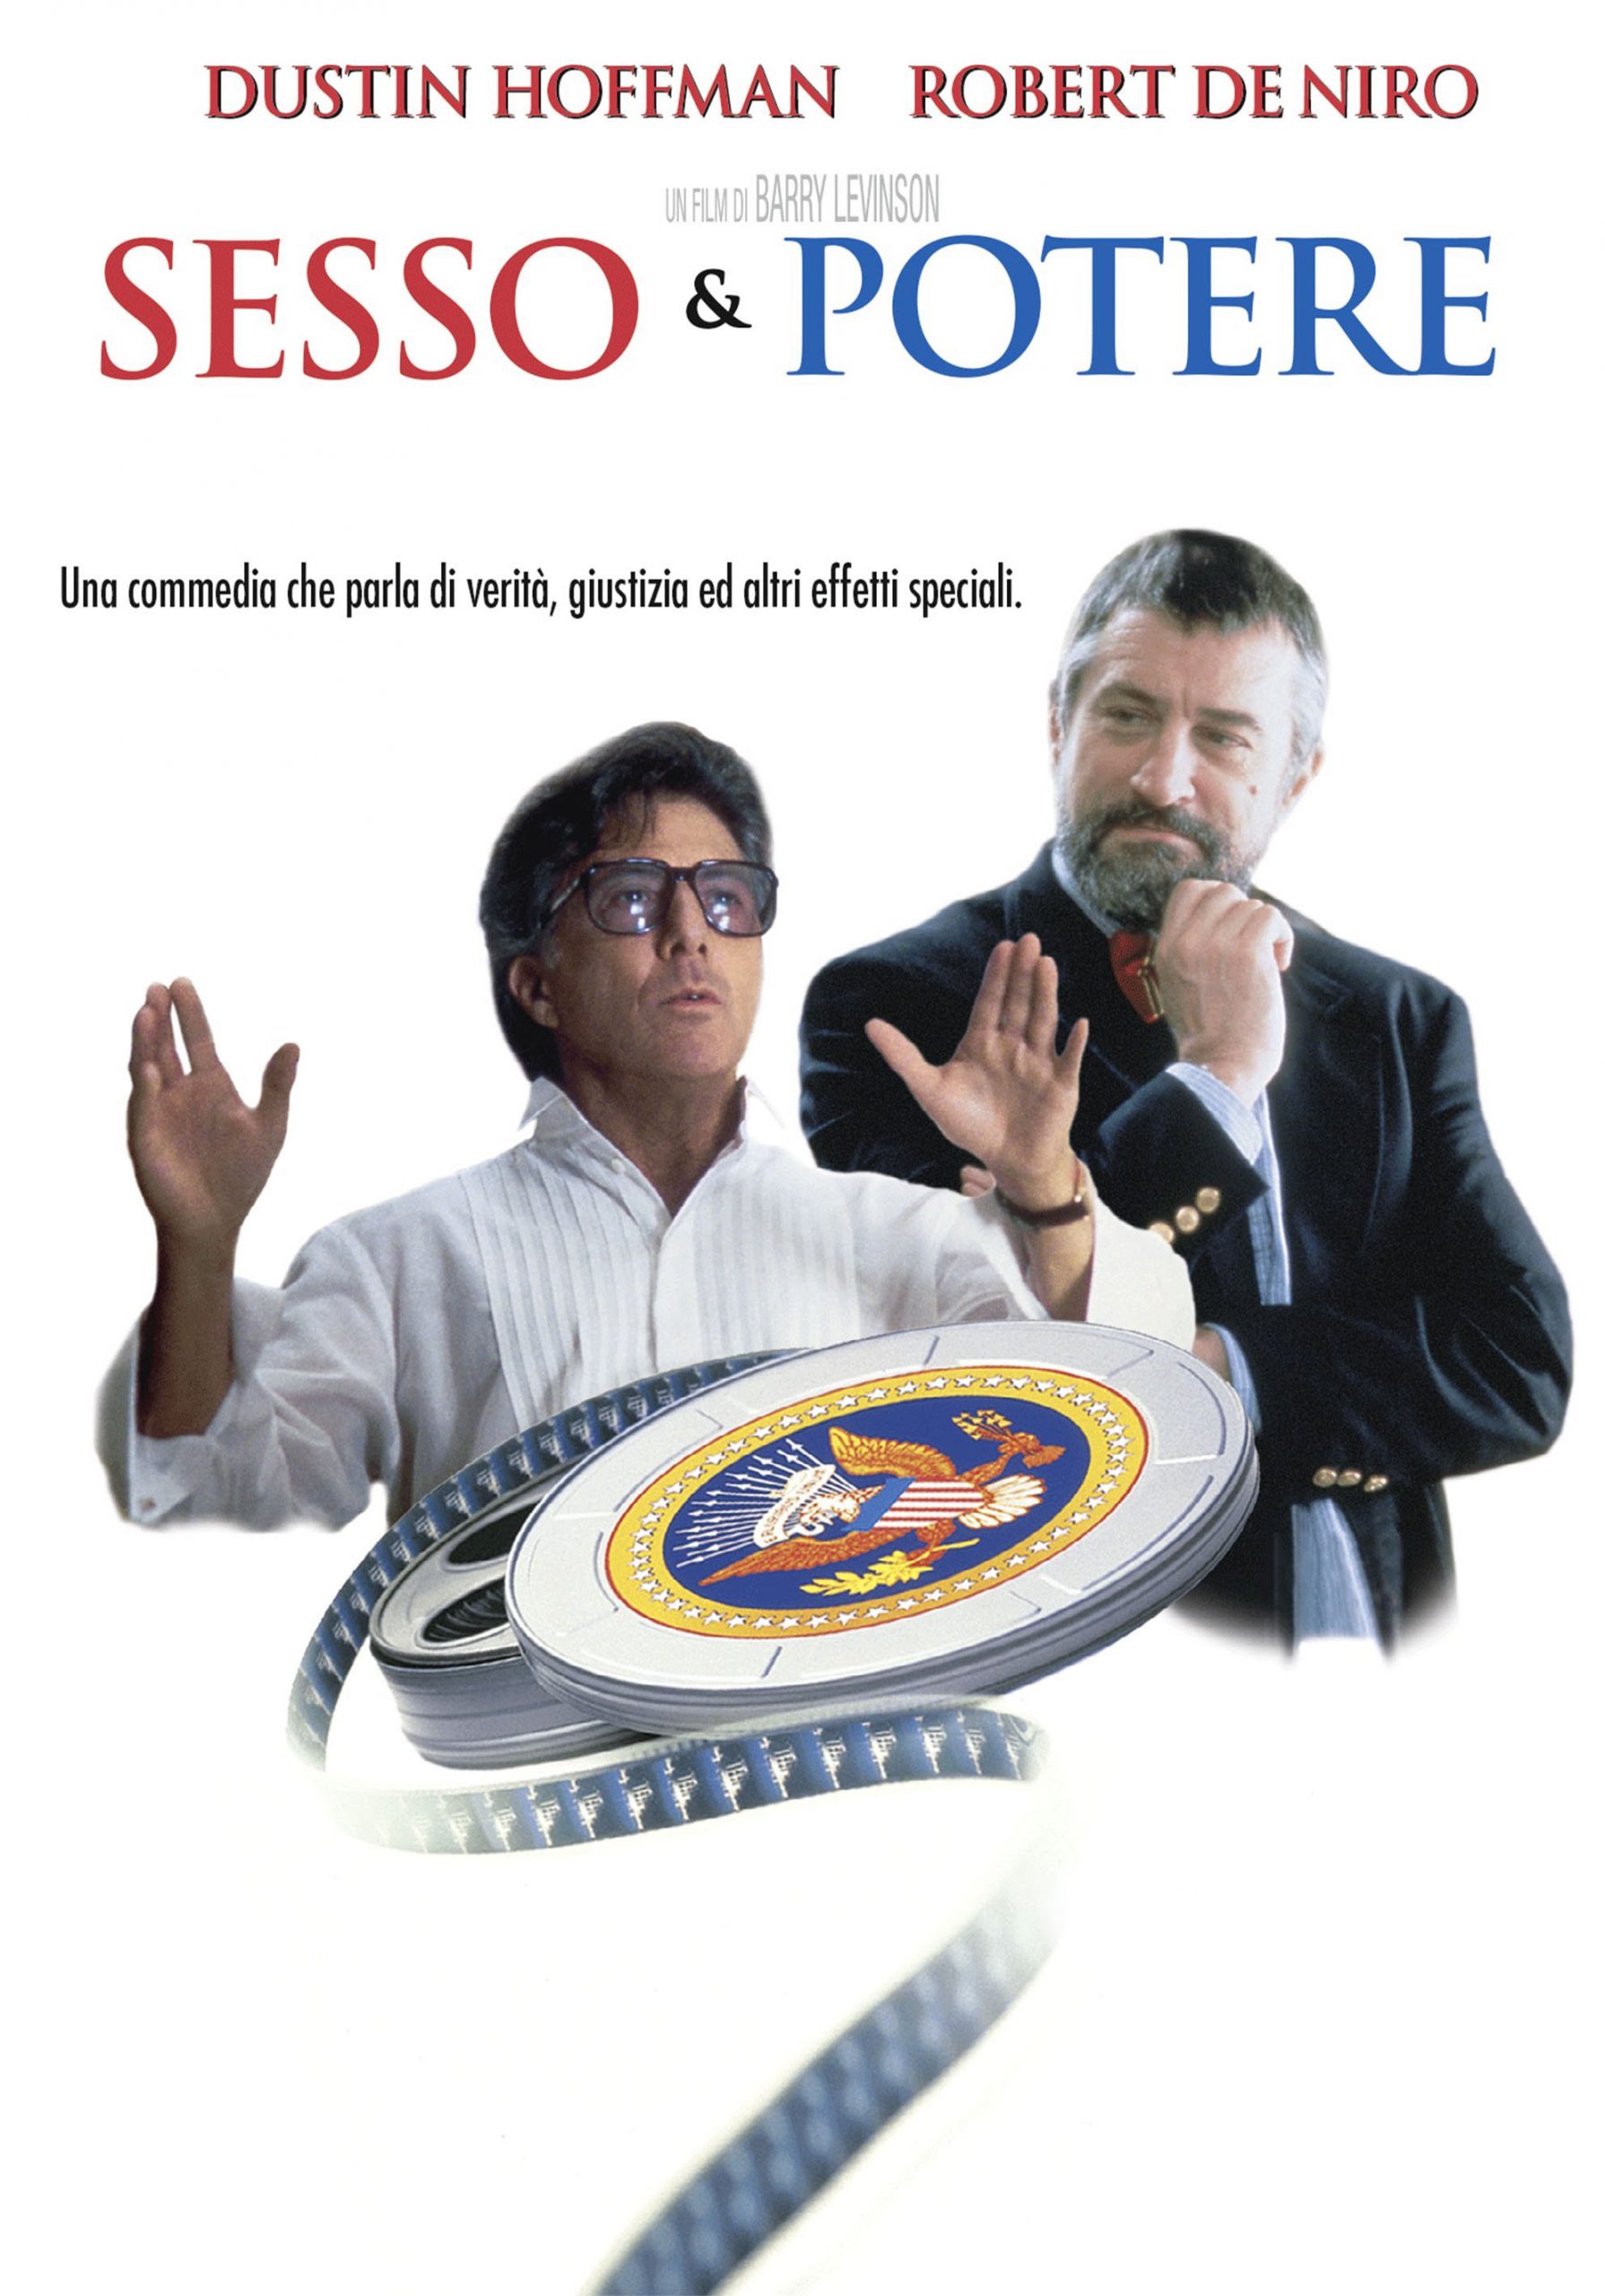 Sesso & Potere [HD] (1998)